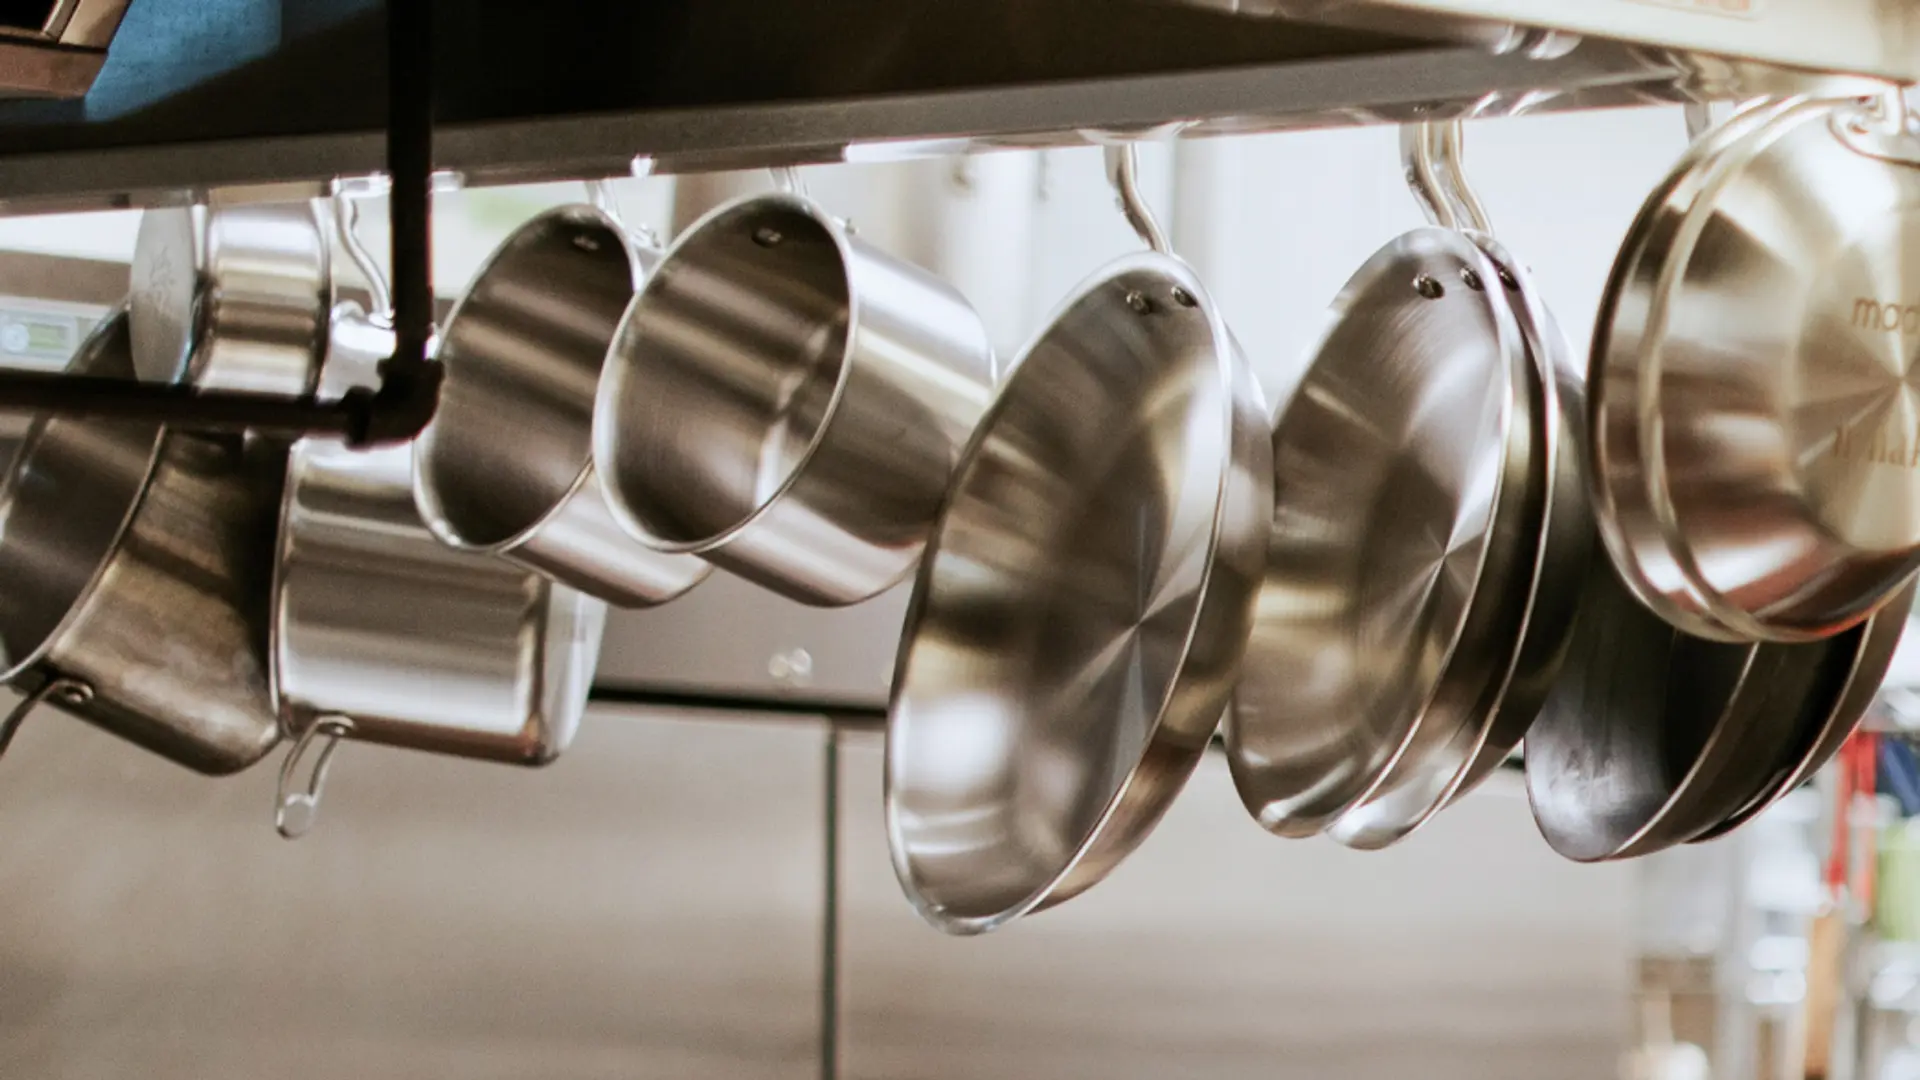 An array of stainless steel pots and pans hangs neatly from a kitchen rack, reflecting the light softly.